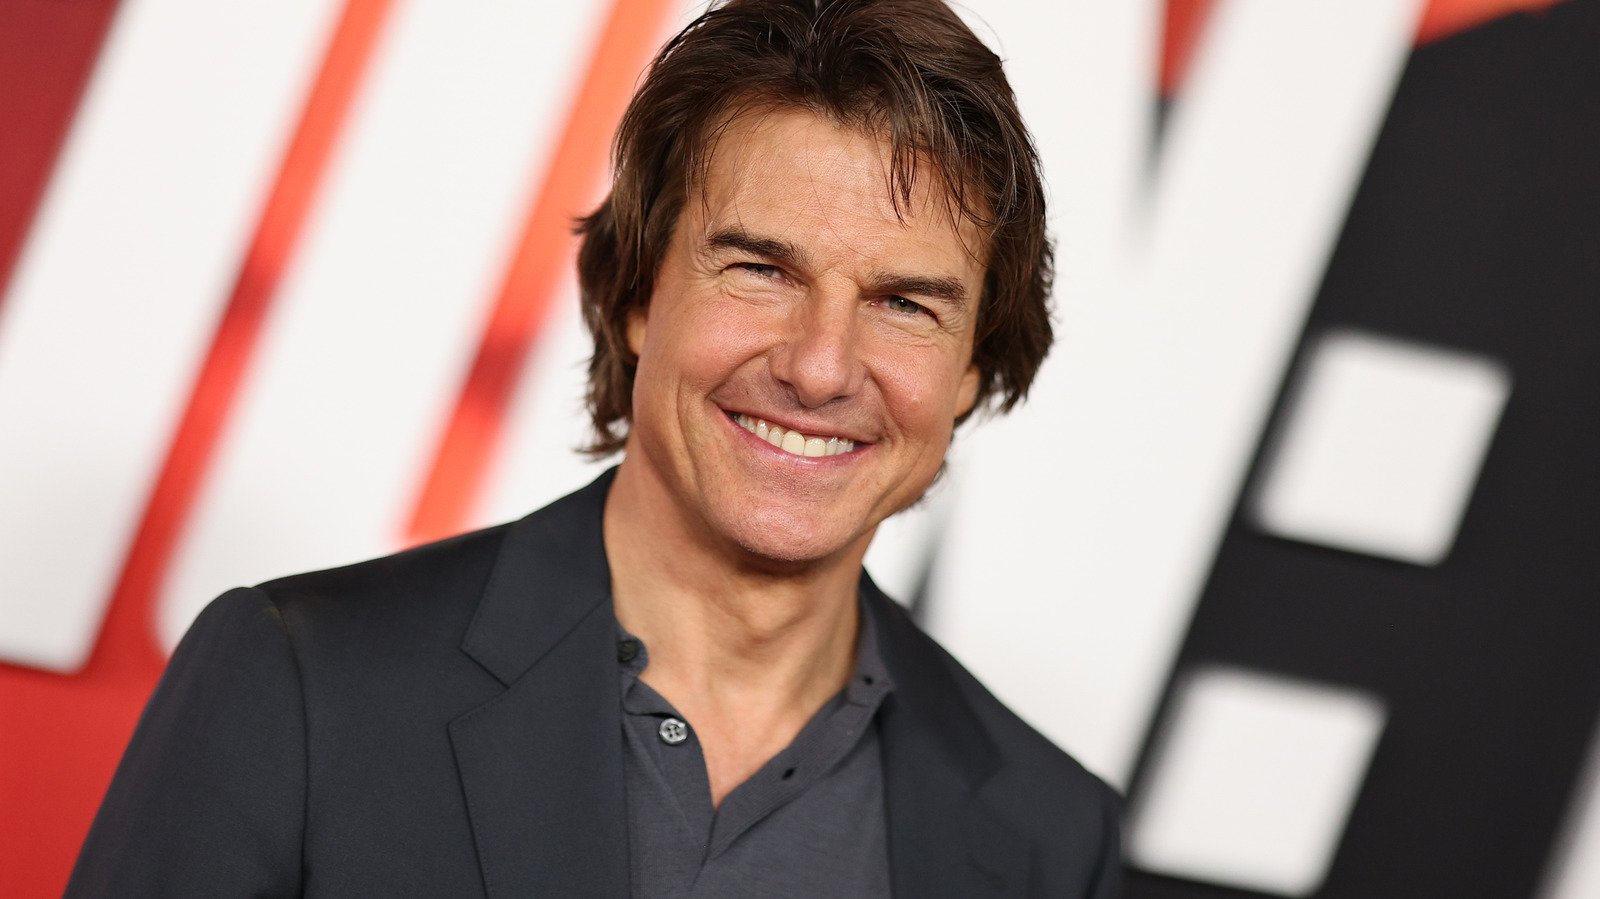 How Rich Is Tom Cruise?